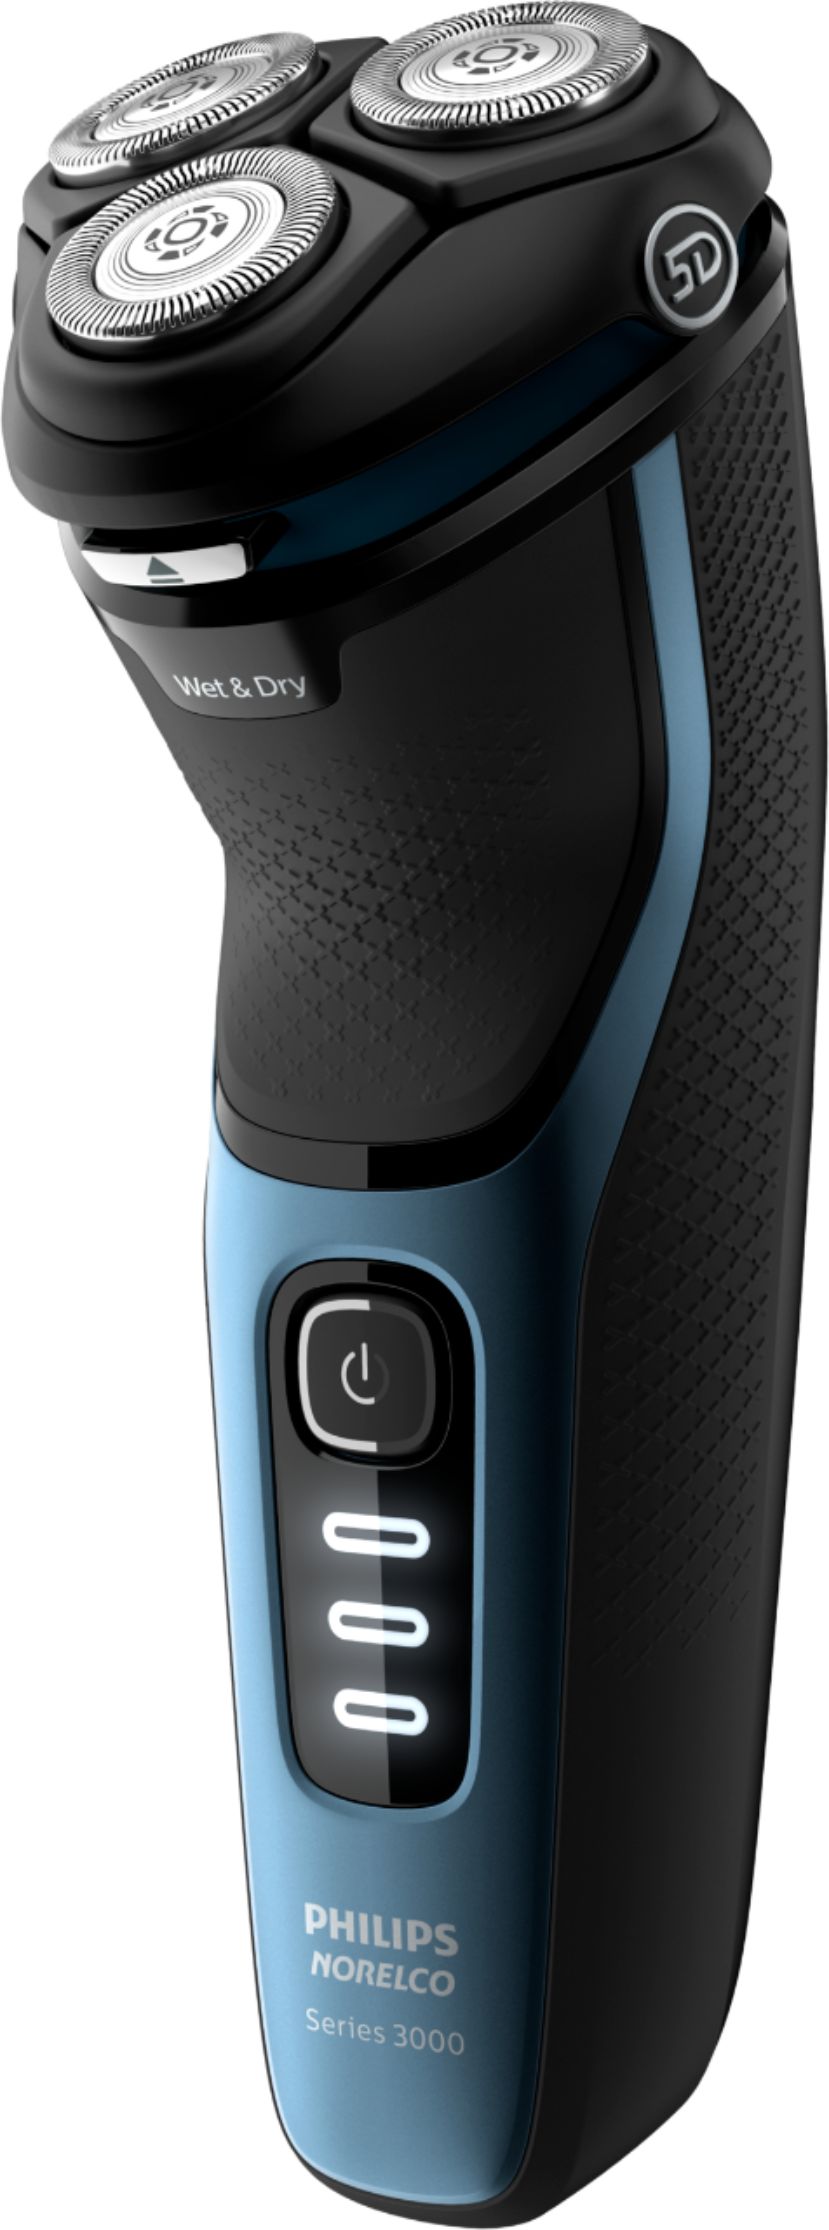 Best Buy: Philips Norelco 3500 series Wet/Dry Electric Shaver 